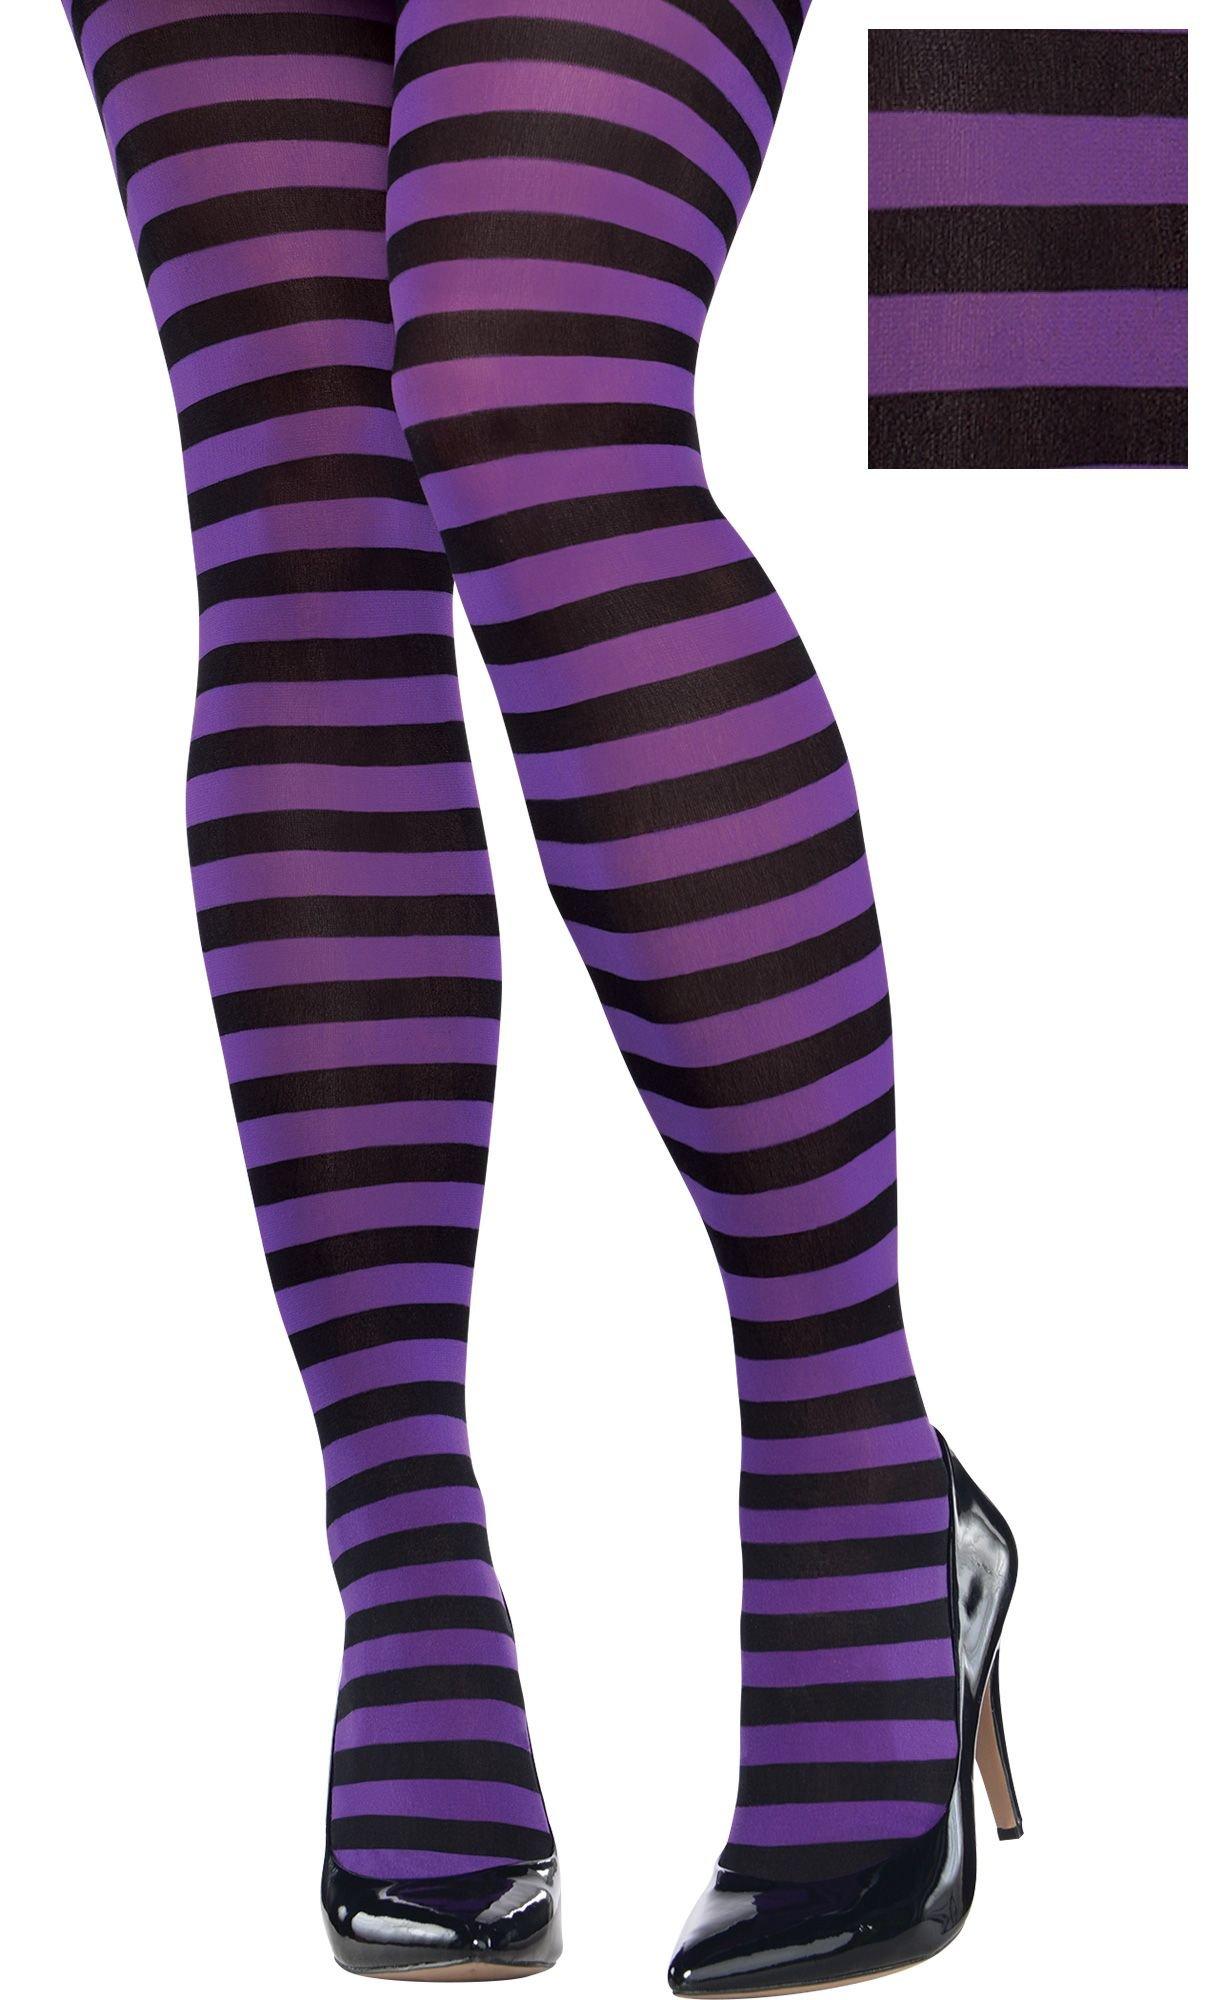 Plus Size Striped Tights - More Colors - Candy Apple Costumes